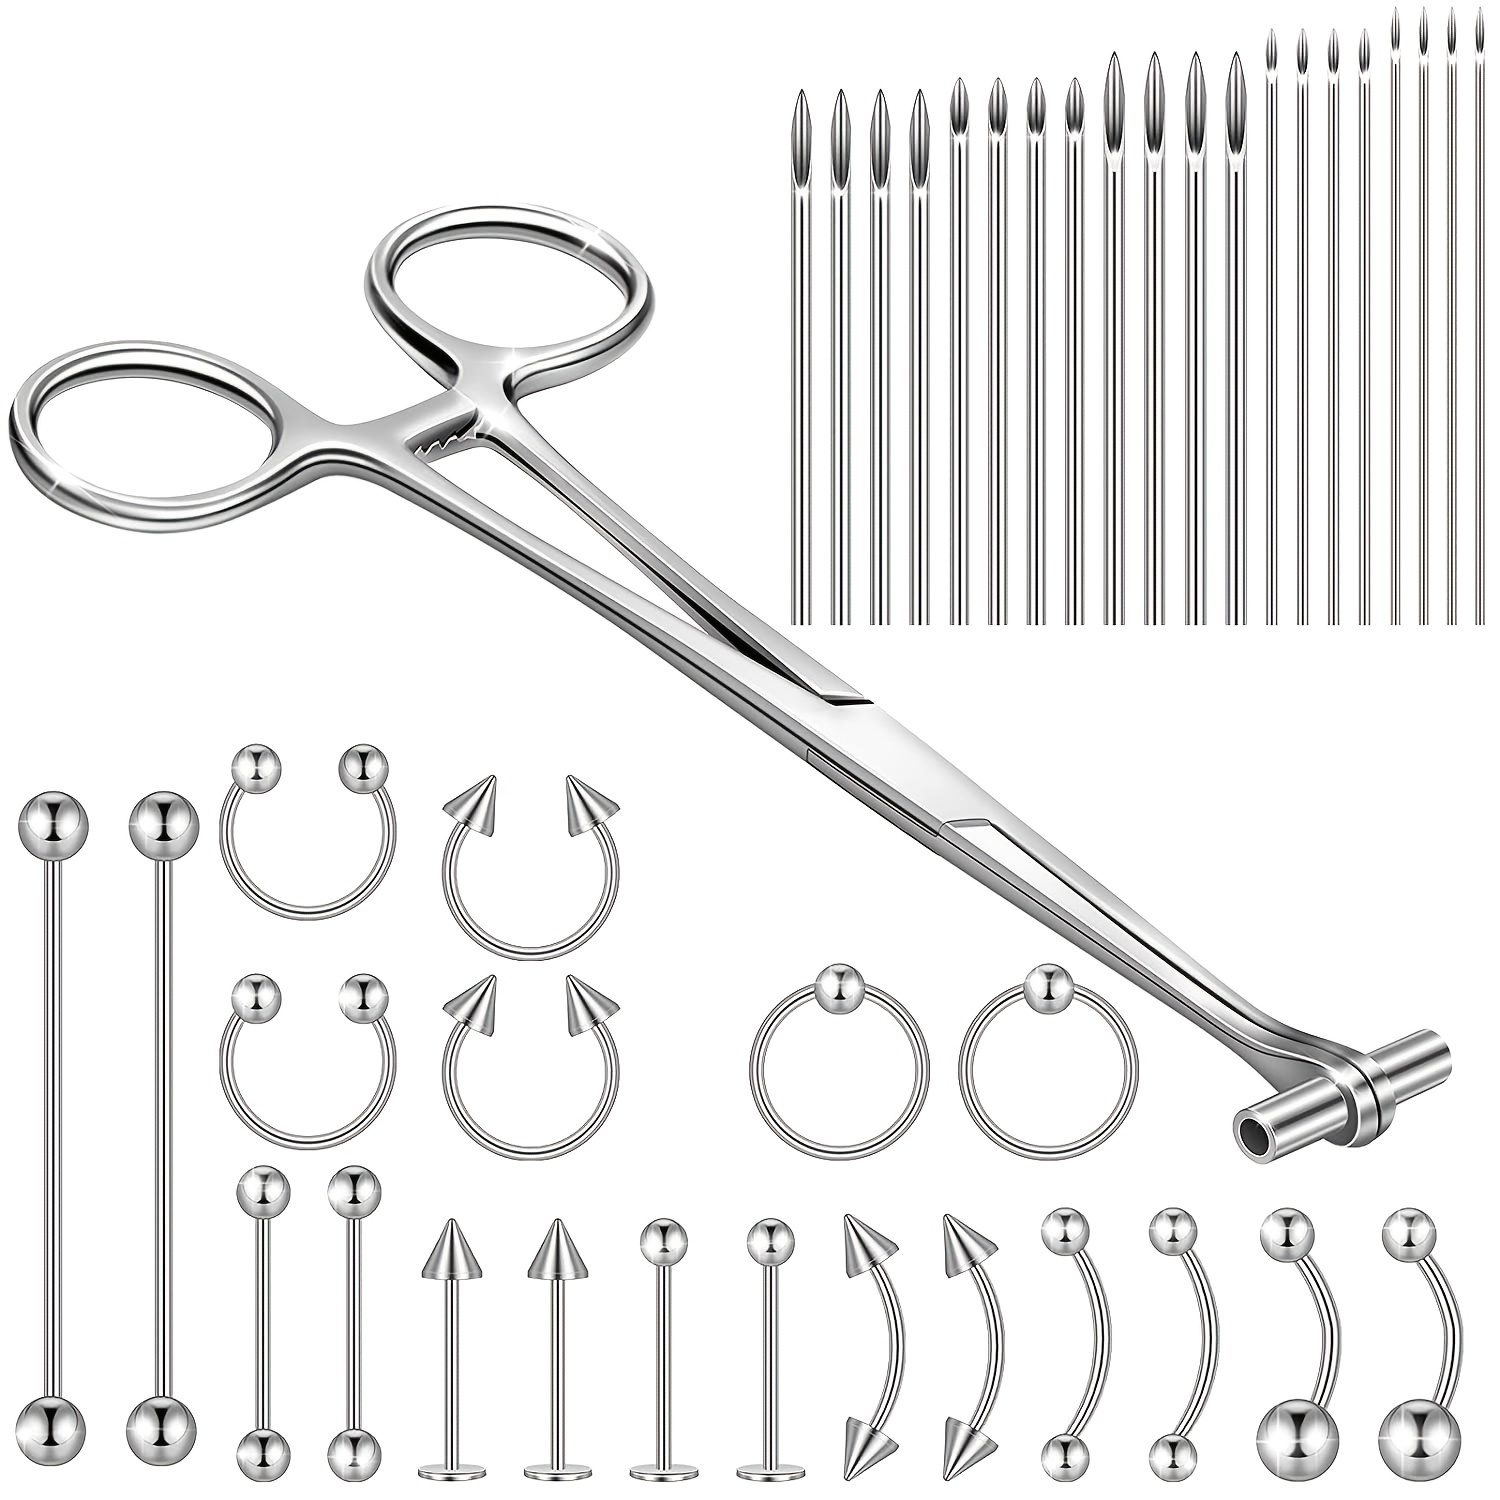 

41 Pieces Body Piercing Tool Kit Include Septum Forceps Clamp Pliers 20 Pcs 316l Stainless Steel Piercing Needles And 20 Pcs Nose Ring Hoop Jewelry For Ear Lip Belly Navel Tongue